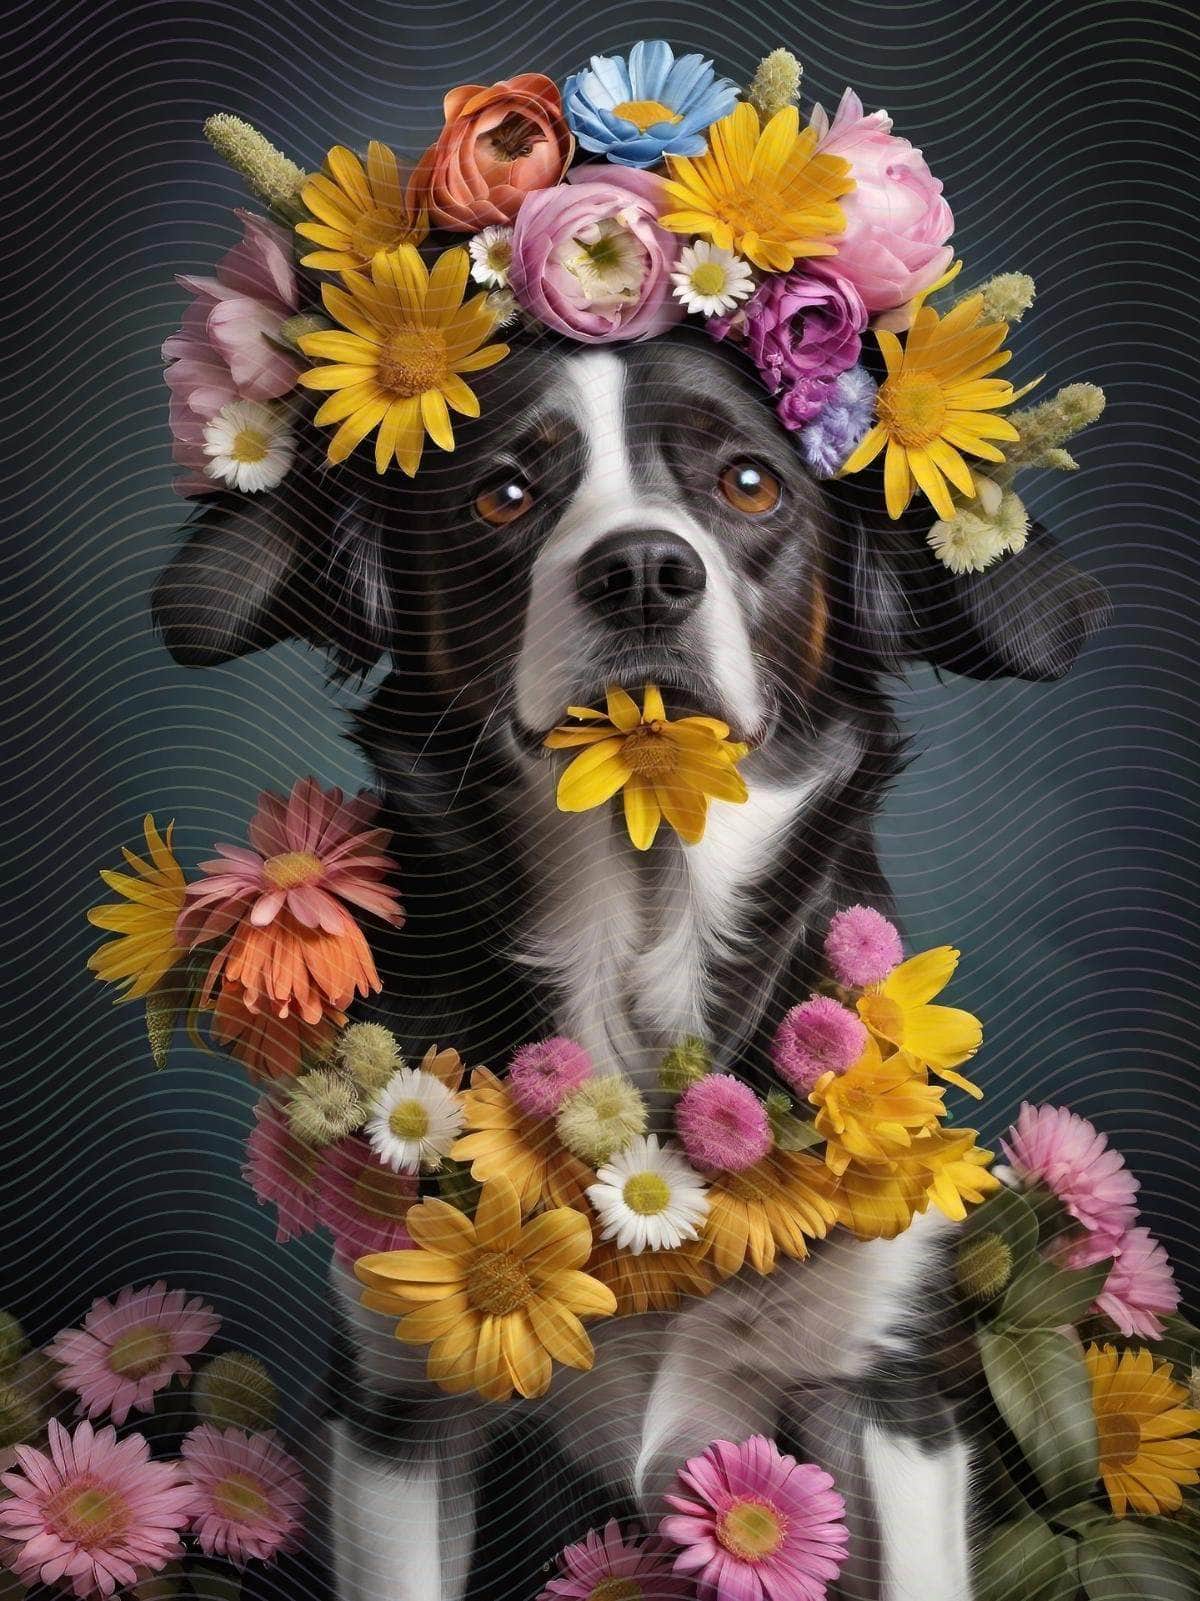 A Dog with a Bunch of Flowers On its Head